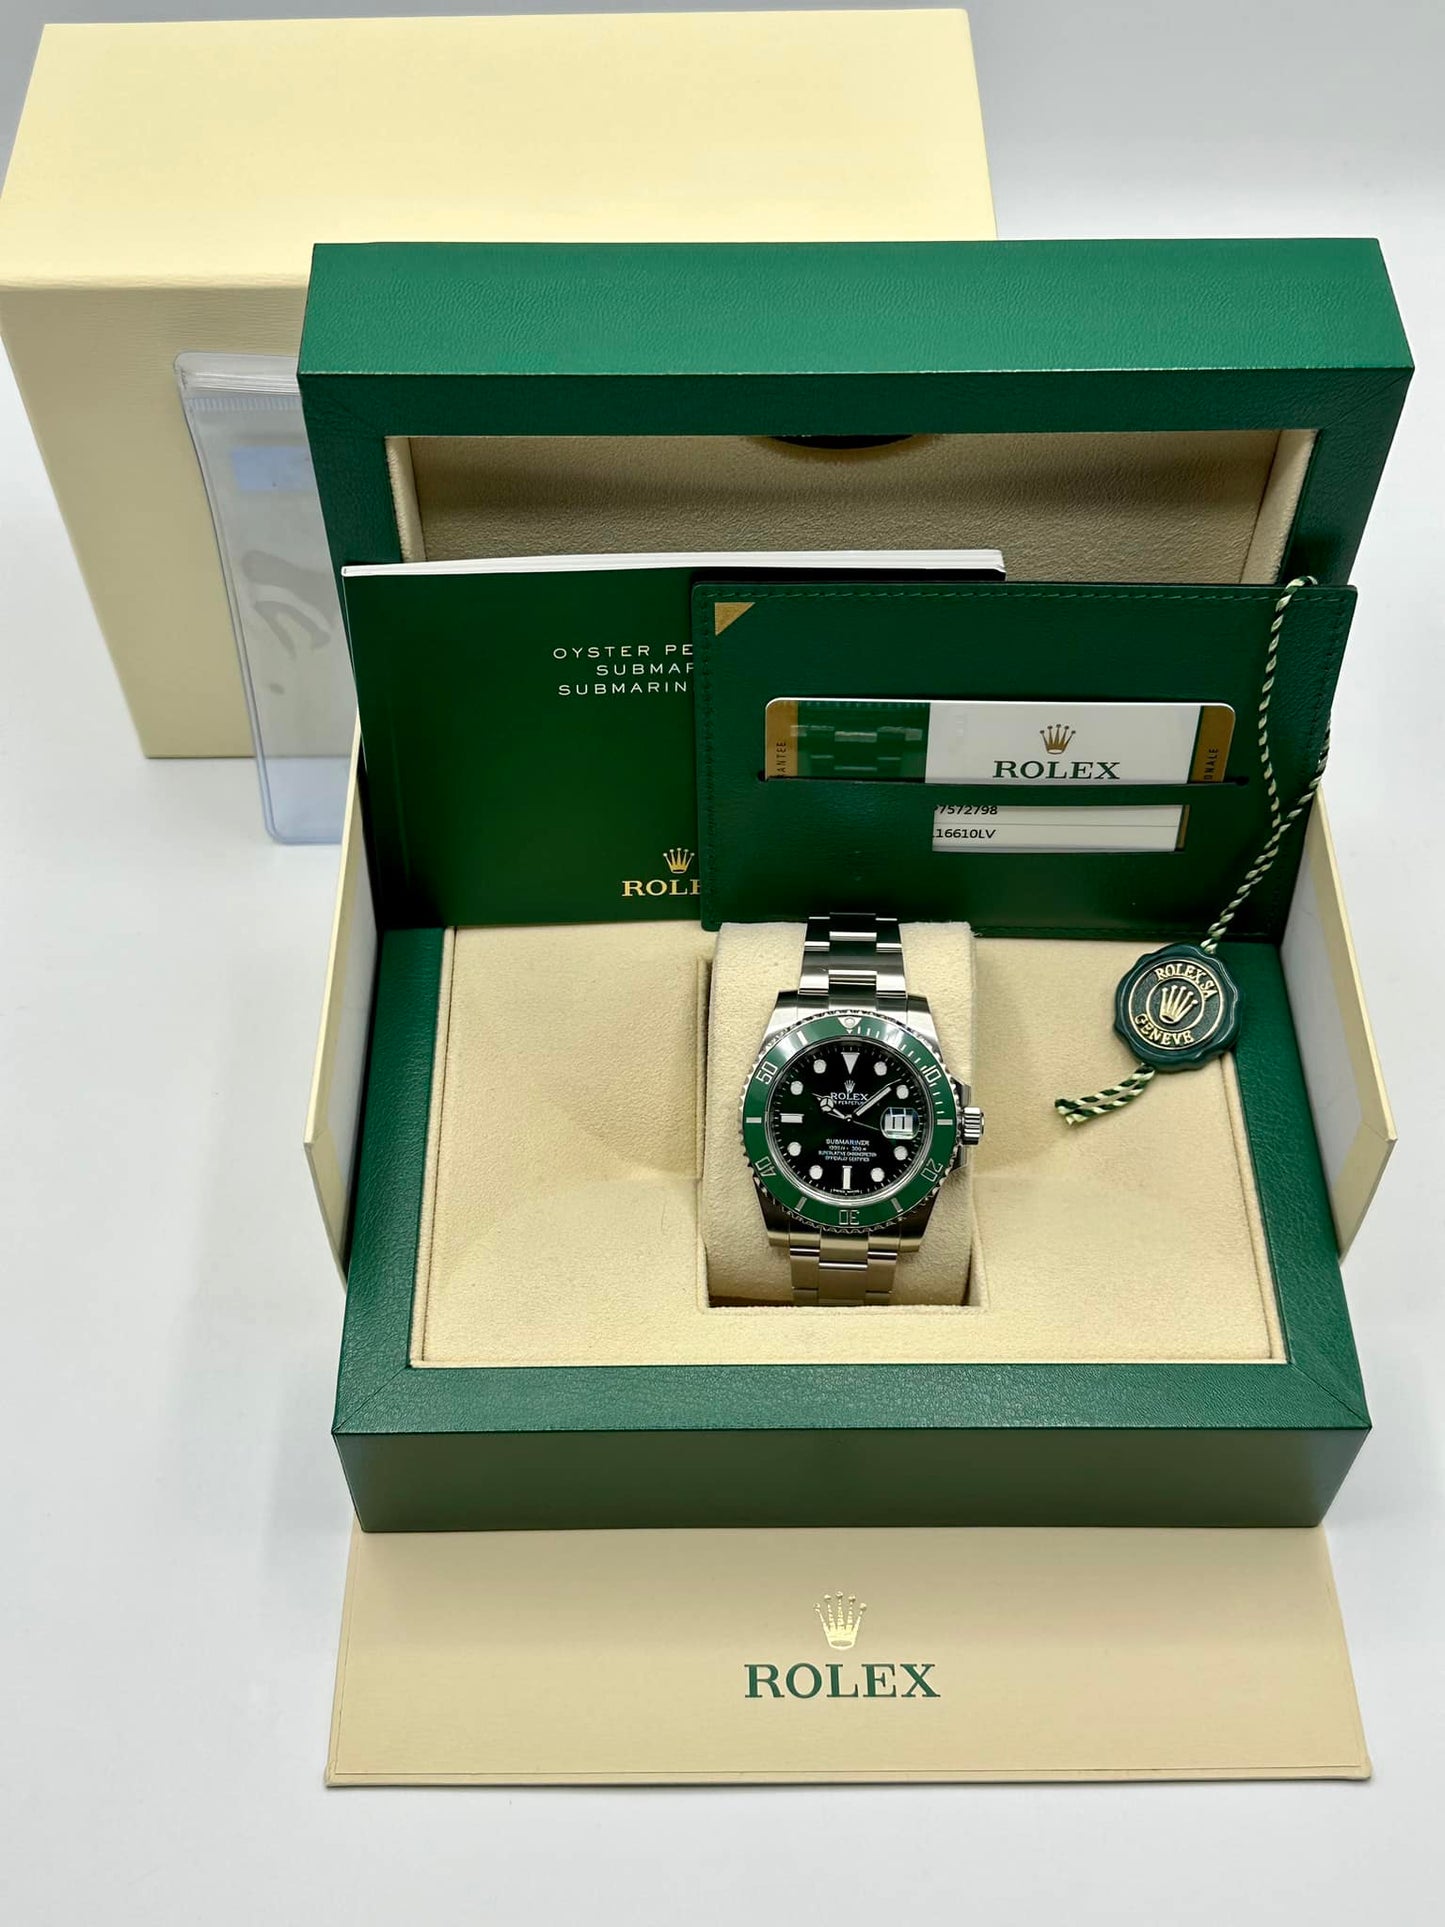 2016 Rolex Submariner "Hulk" 116610LV Stainless Steel Green Dial - MyWatchLLC